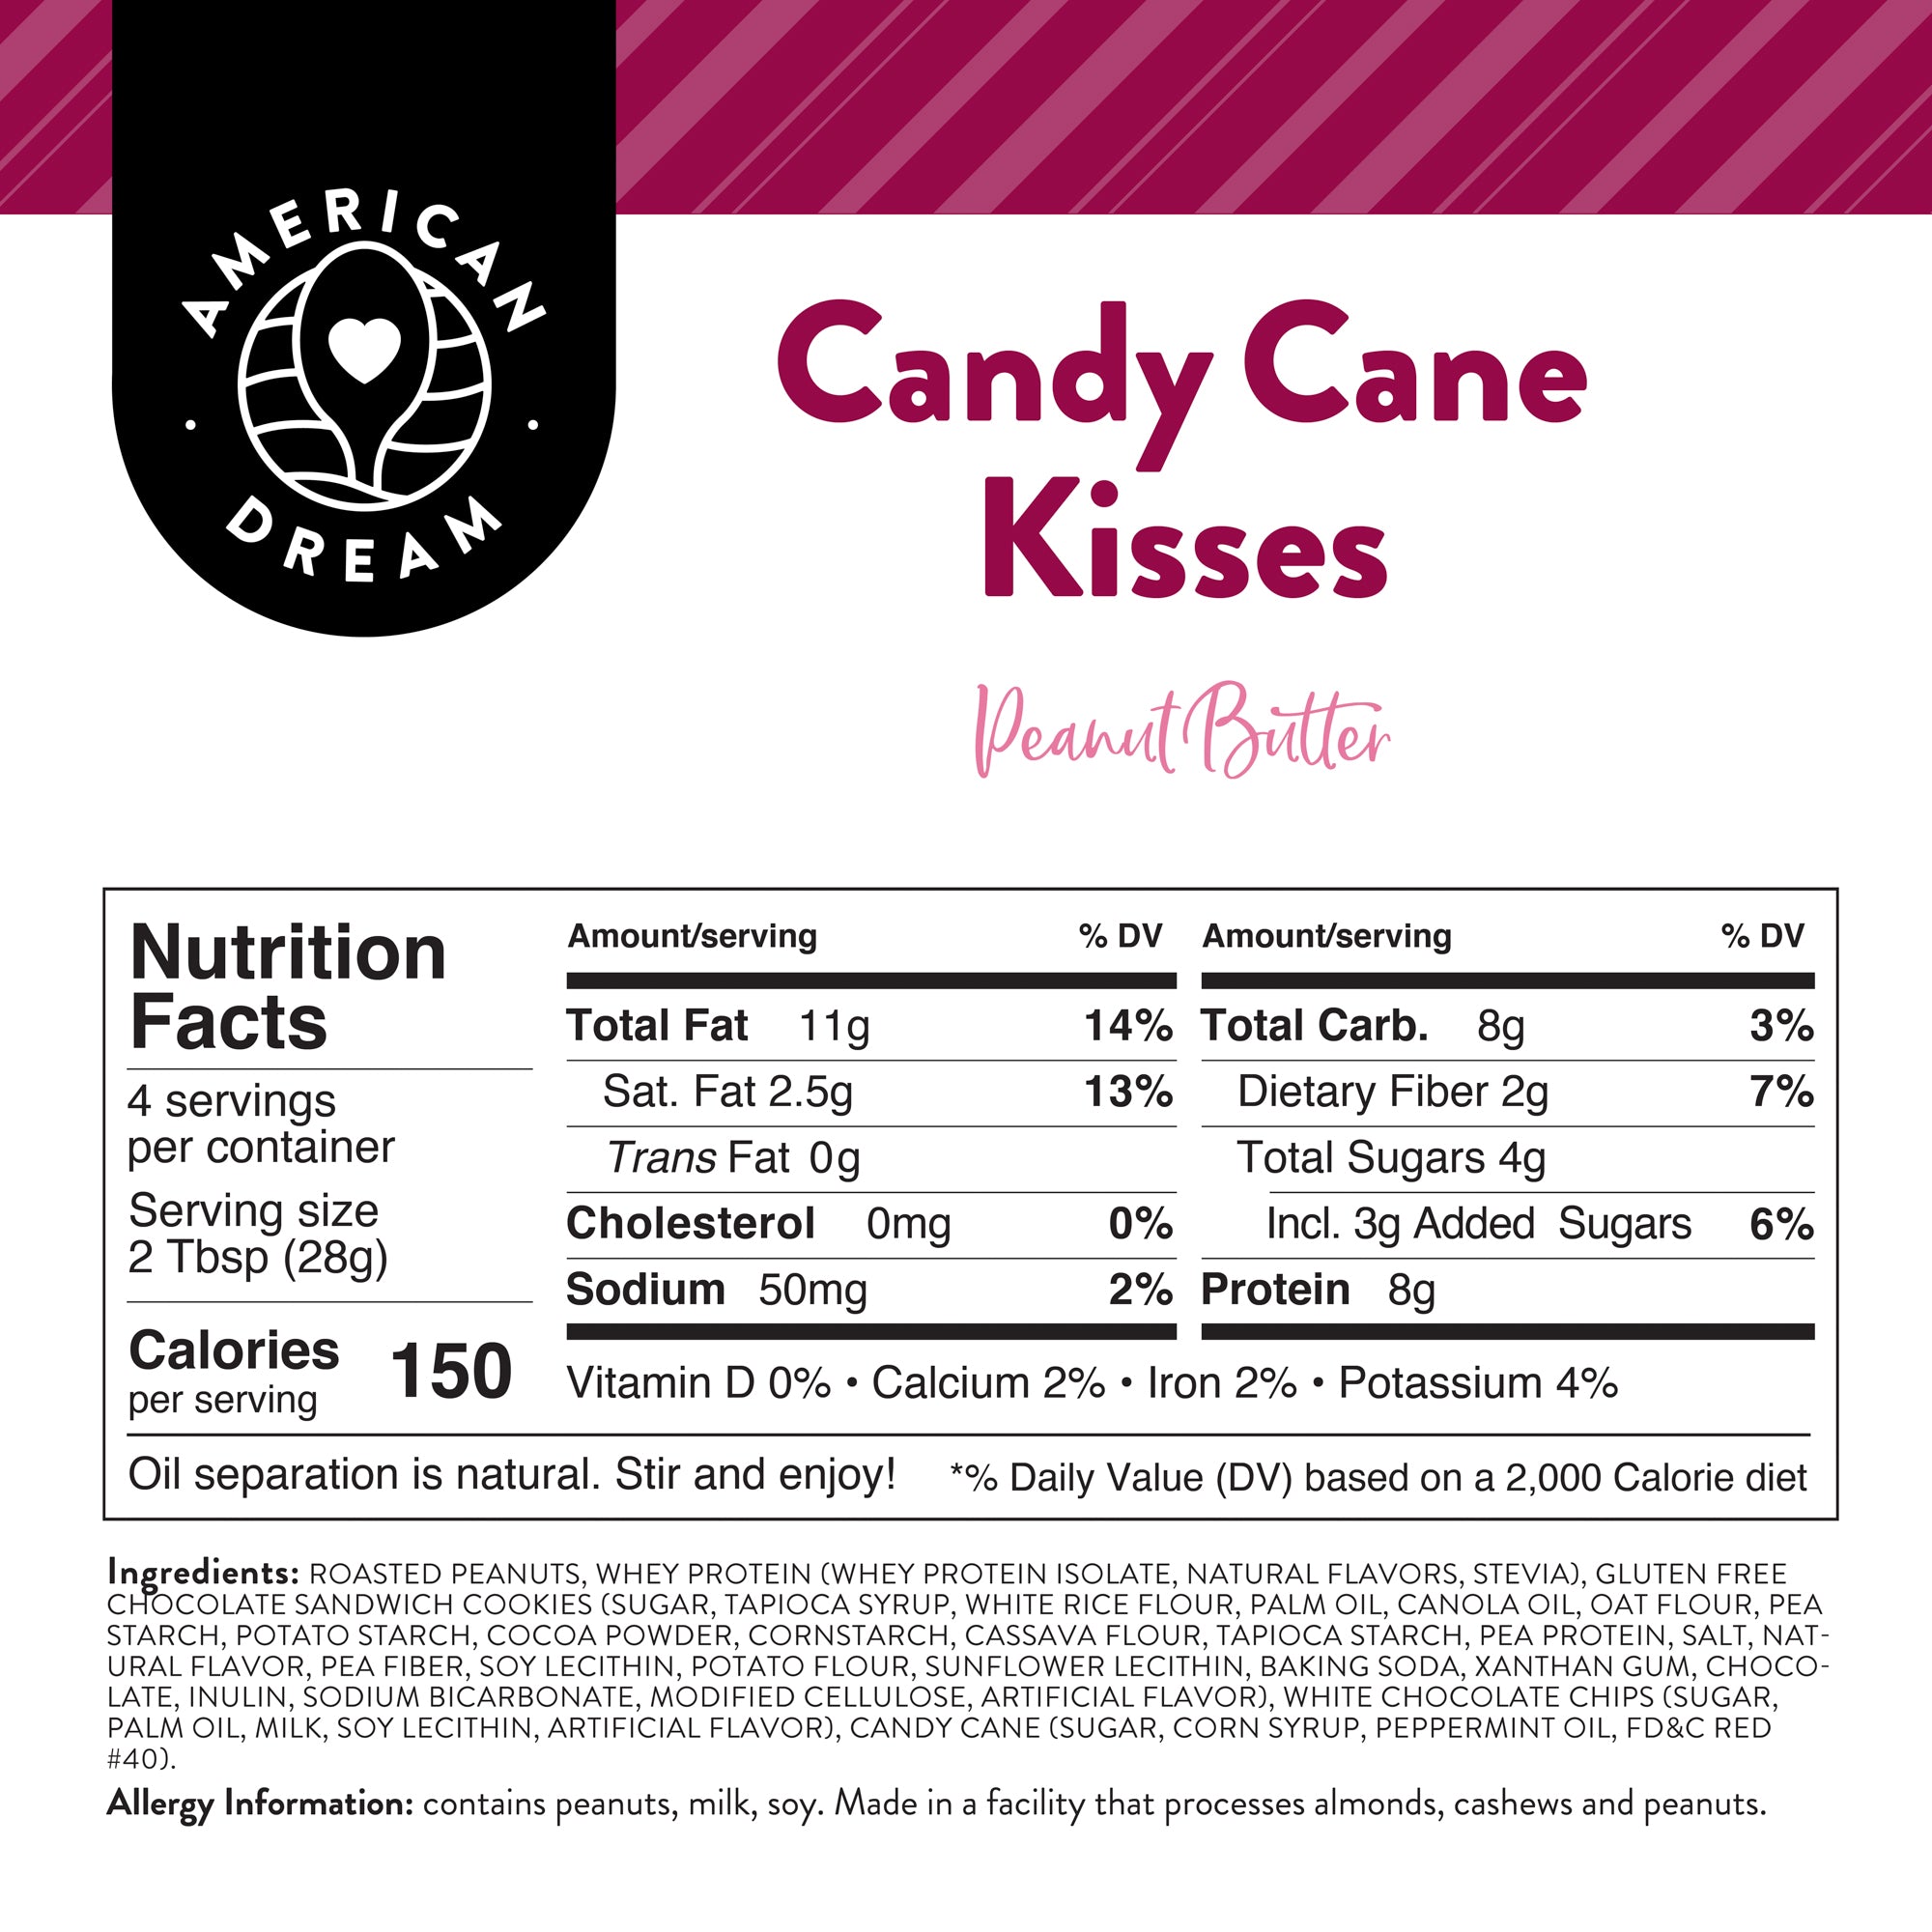 Baby Butter 4oz Gluten-Free Candy Cane Kisses Peanut Butter